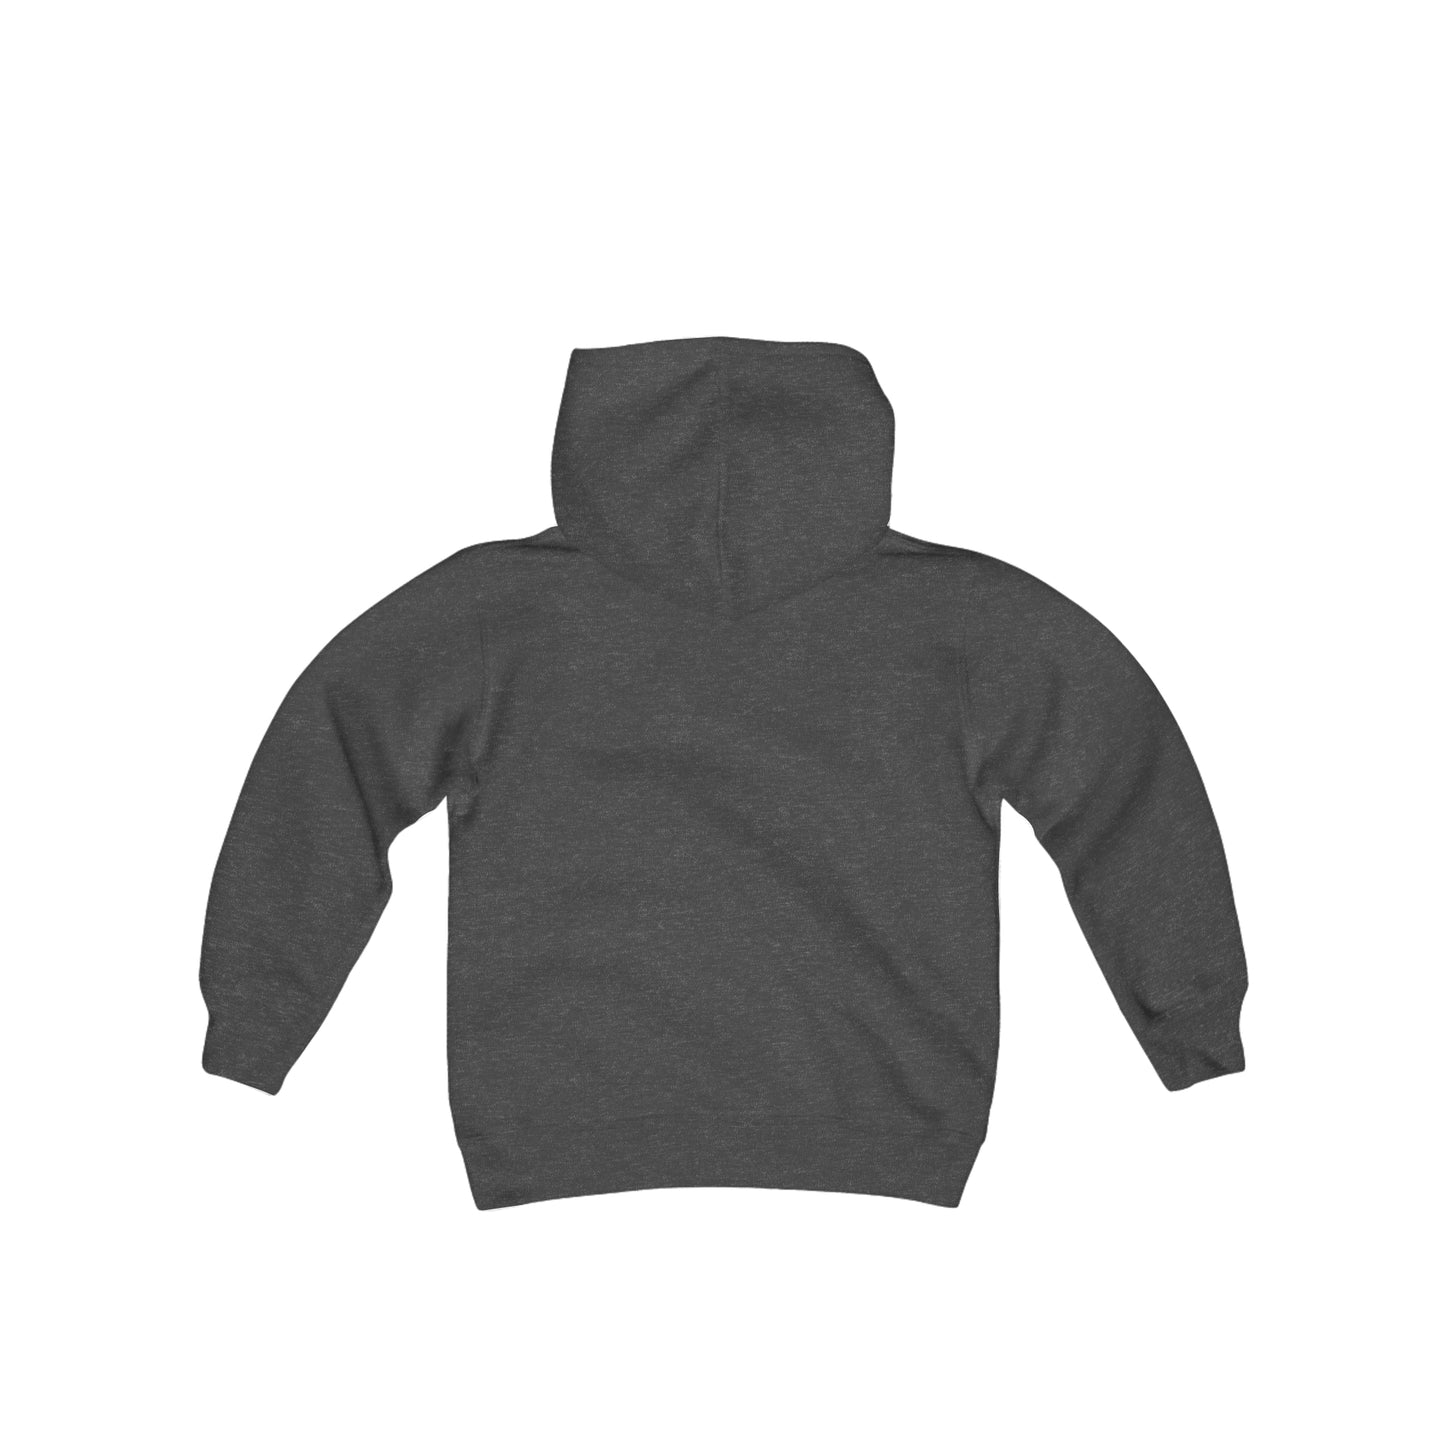 INSPIRED RAISE YOUR STANDARDS Youth Heavy Blend Hooded Sweatshirt